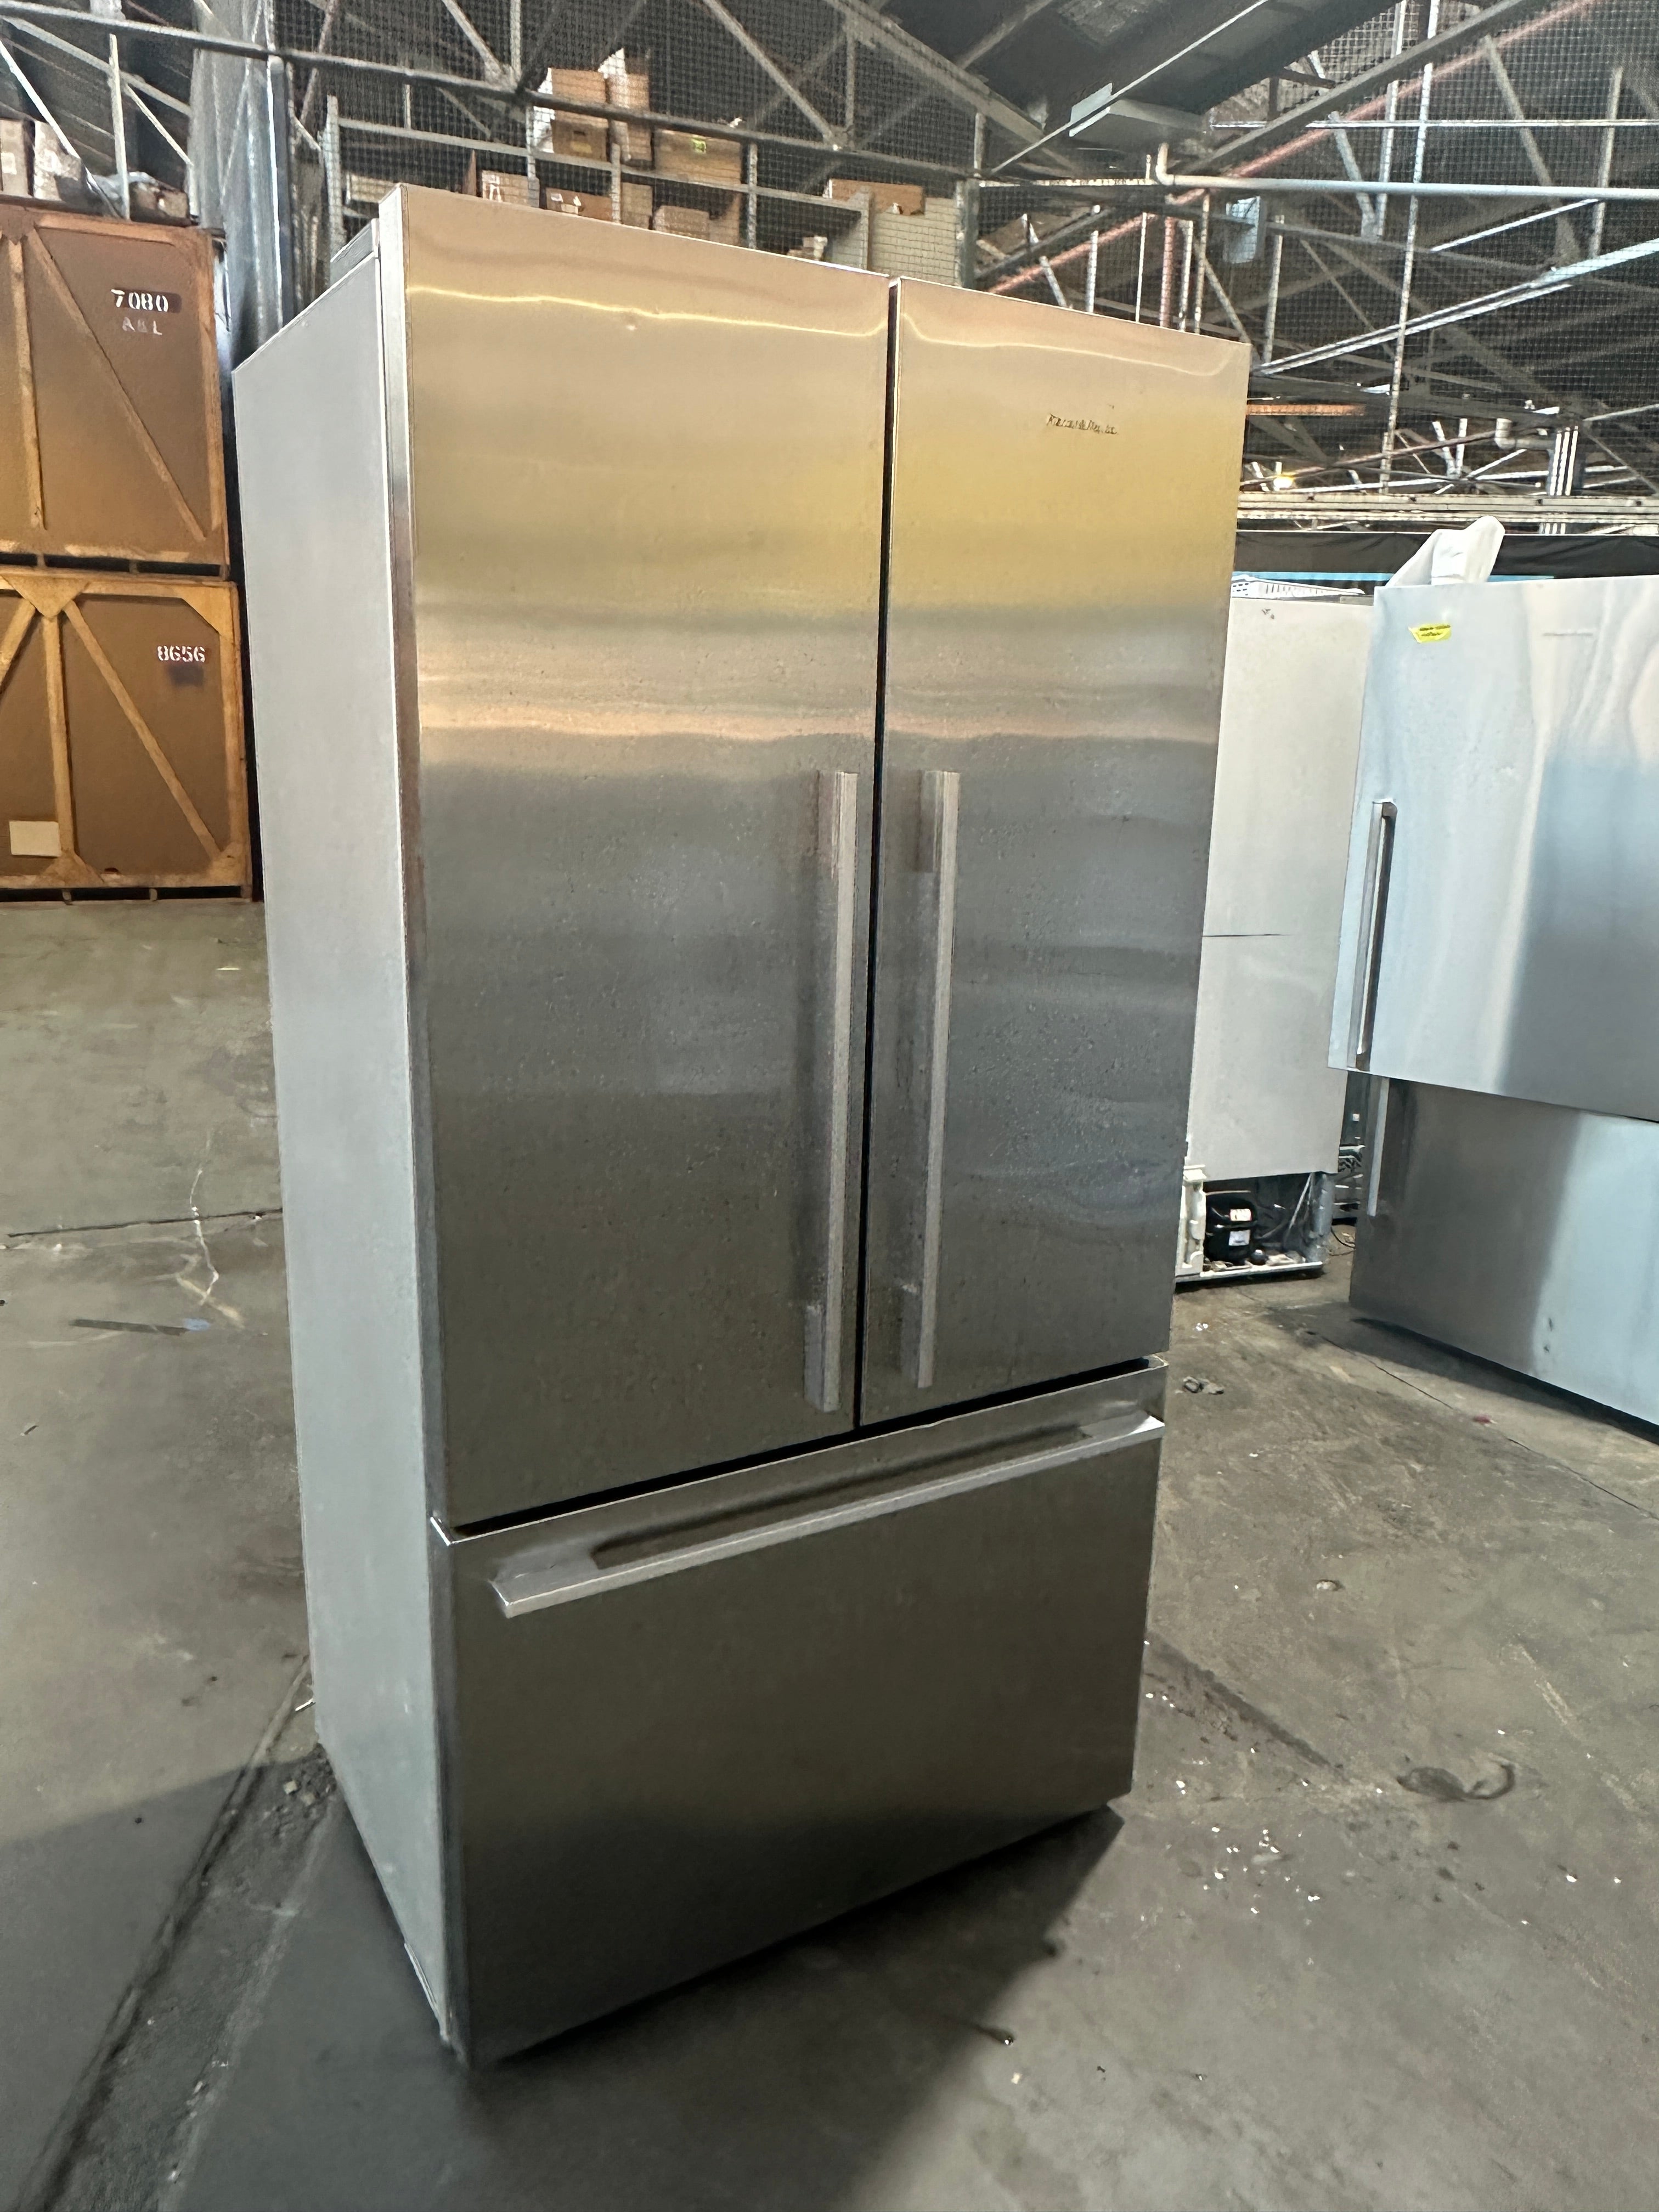 RF610ADX4 Active Smart Fisher & Paykel Stainless French Door 569 L Refrigerator - Sydney Appliances Outlet